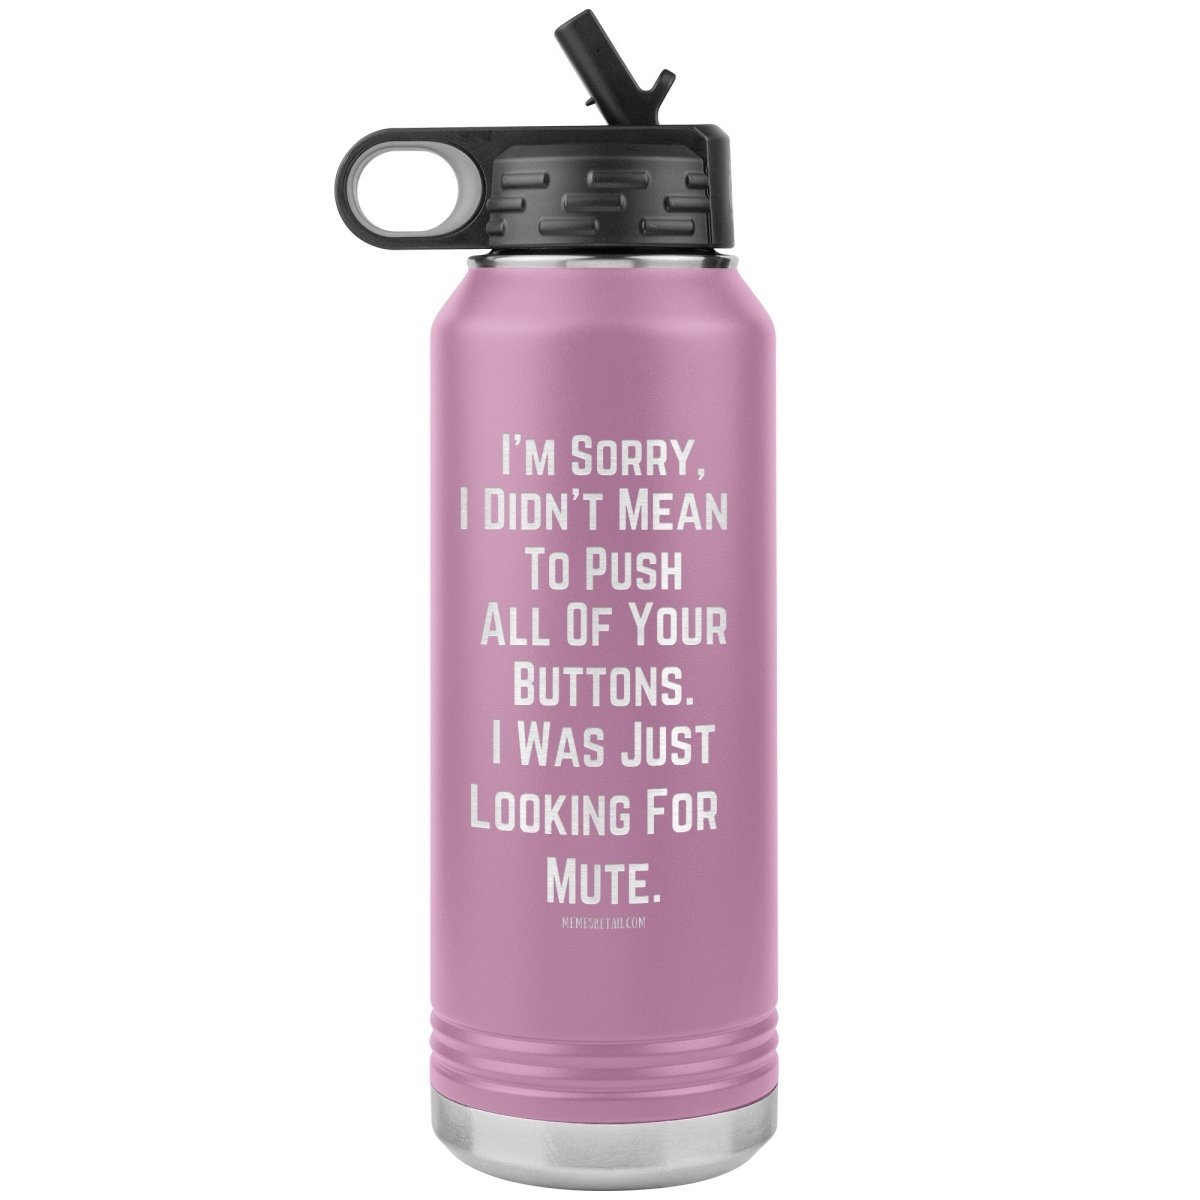 I’m sorry, I didn’t mean to push all your buttons, I was just looking for mute 32 oz water tumbler, Light Purple - MemesRetail.com